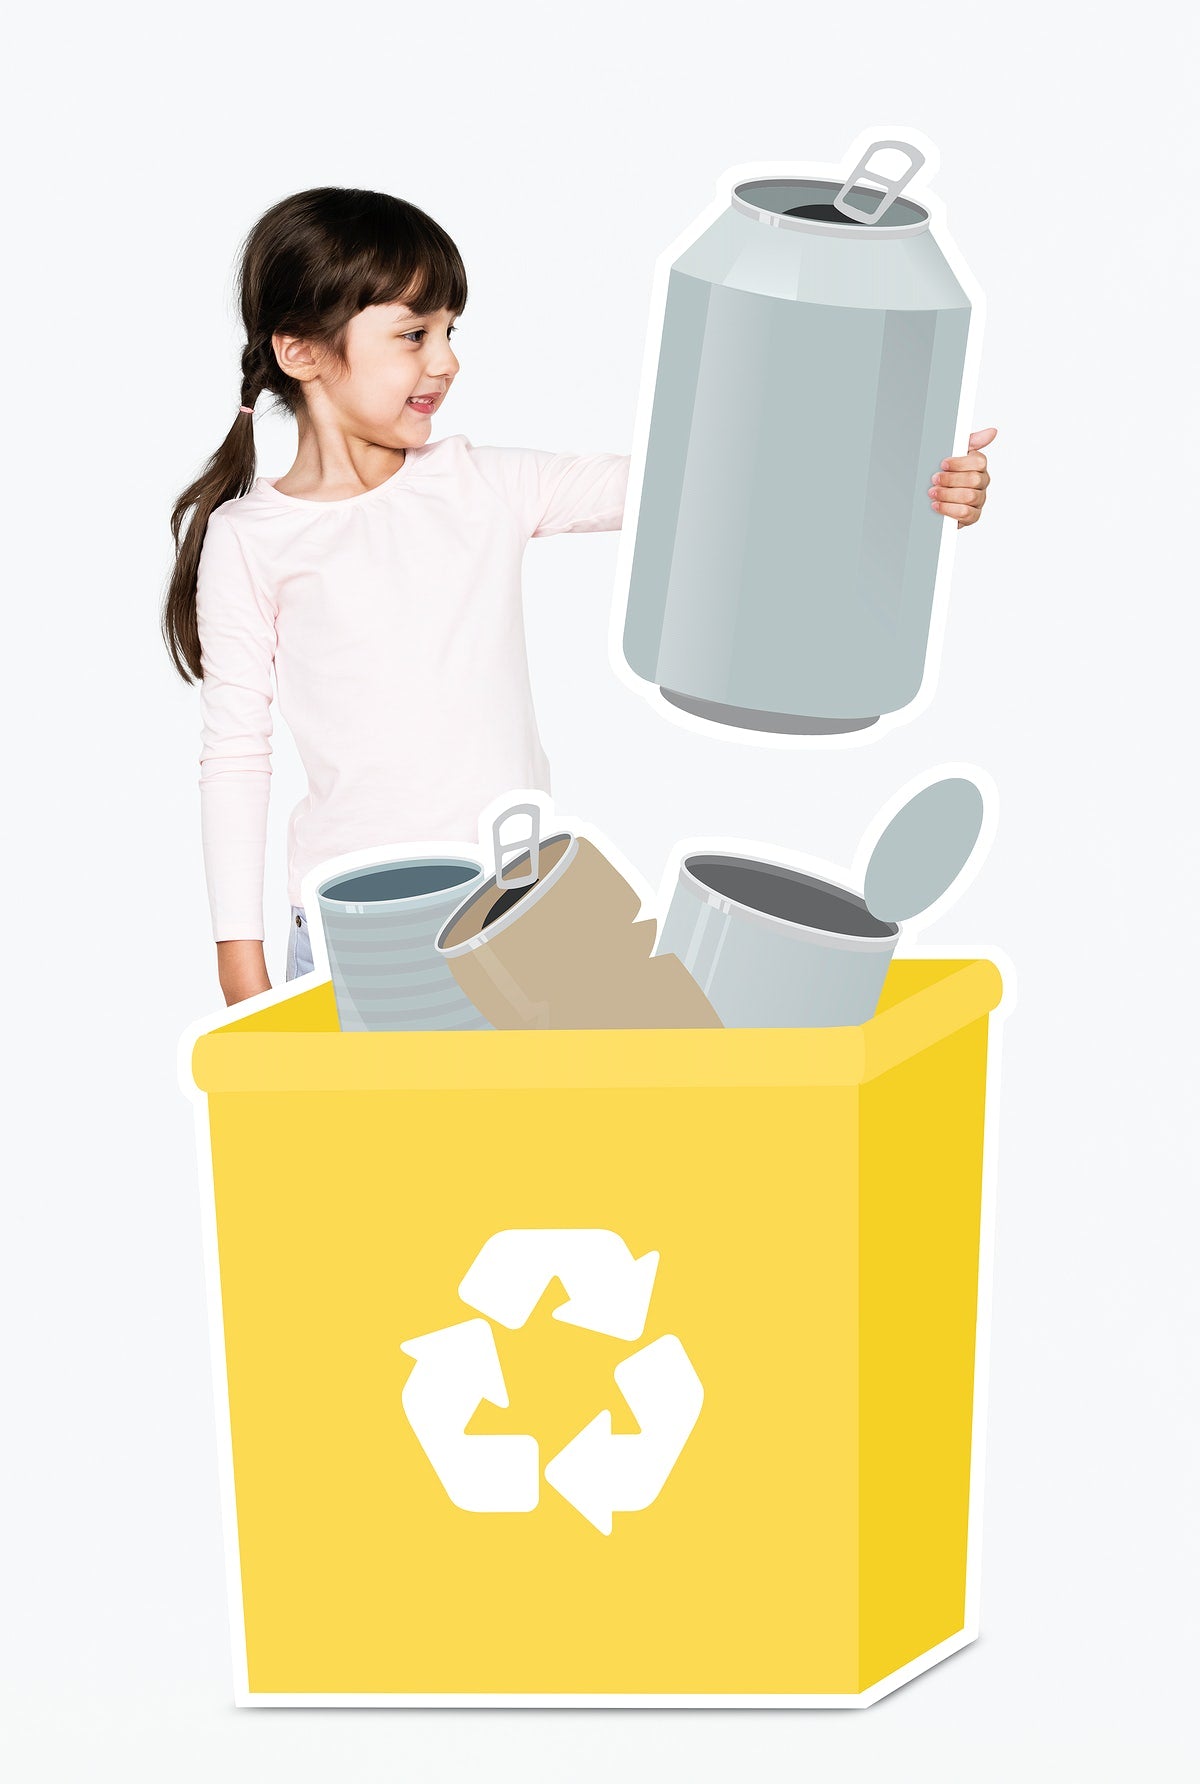 Free Happy Girl Collecting Cans For Recycling